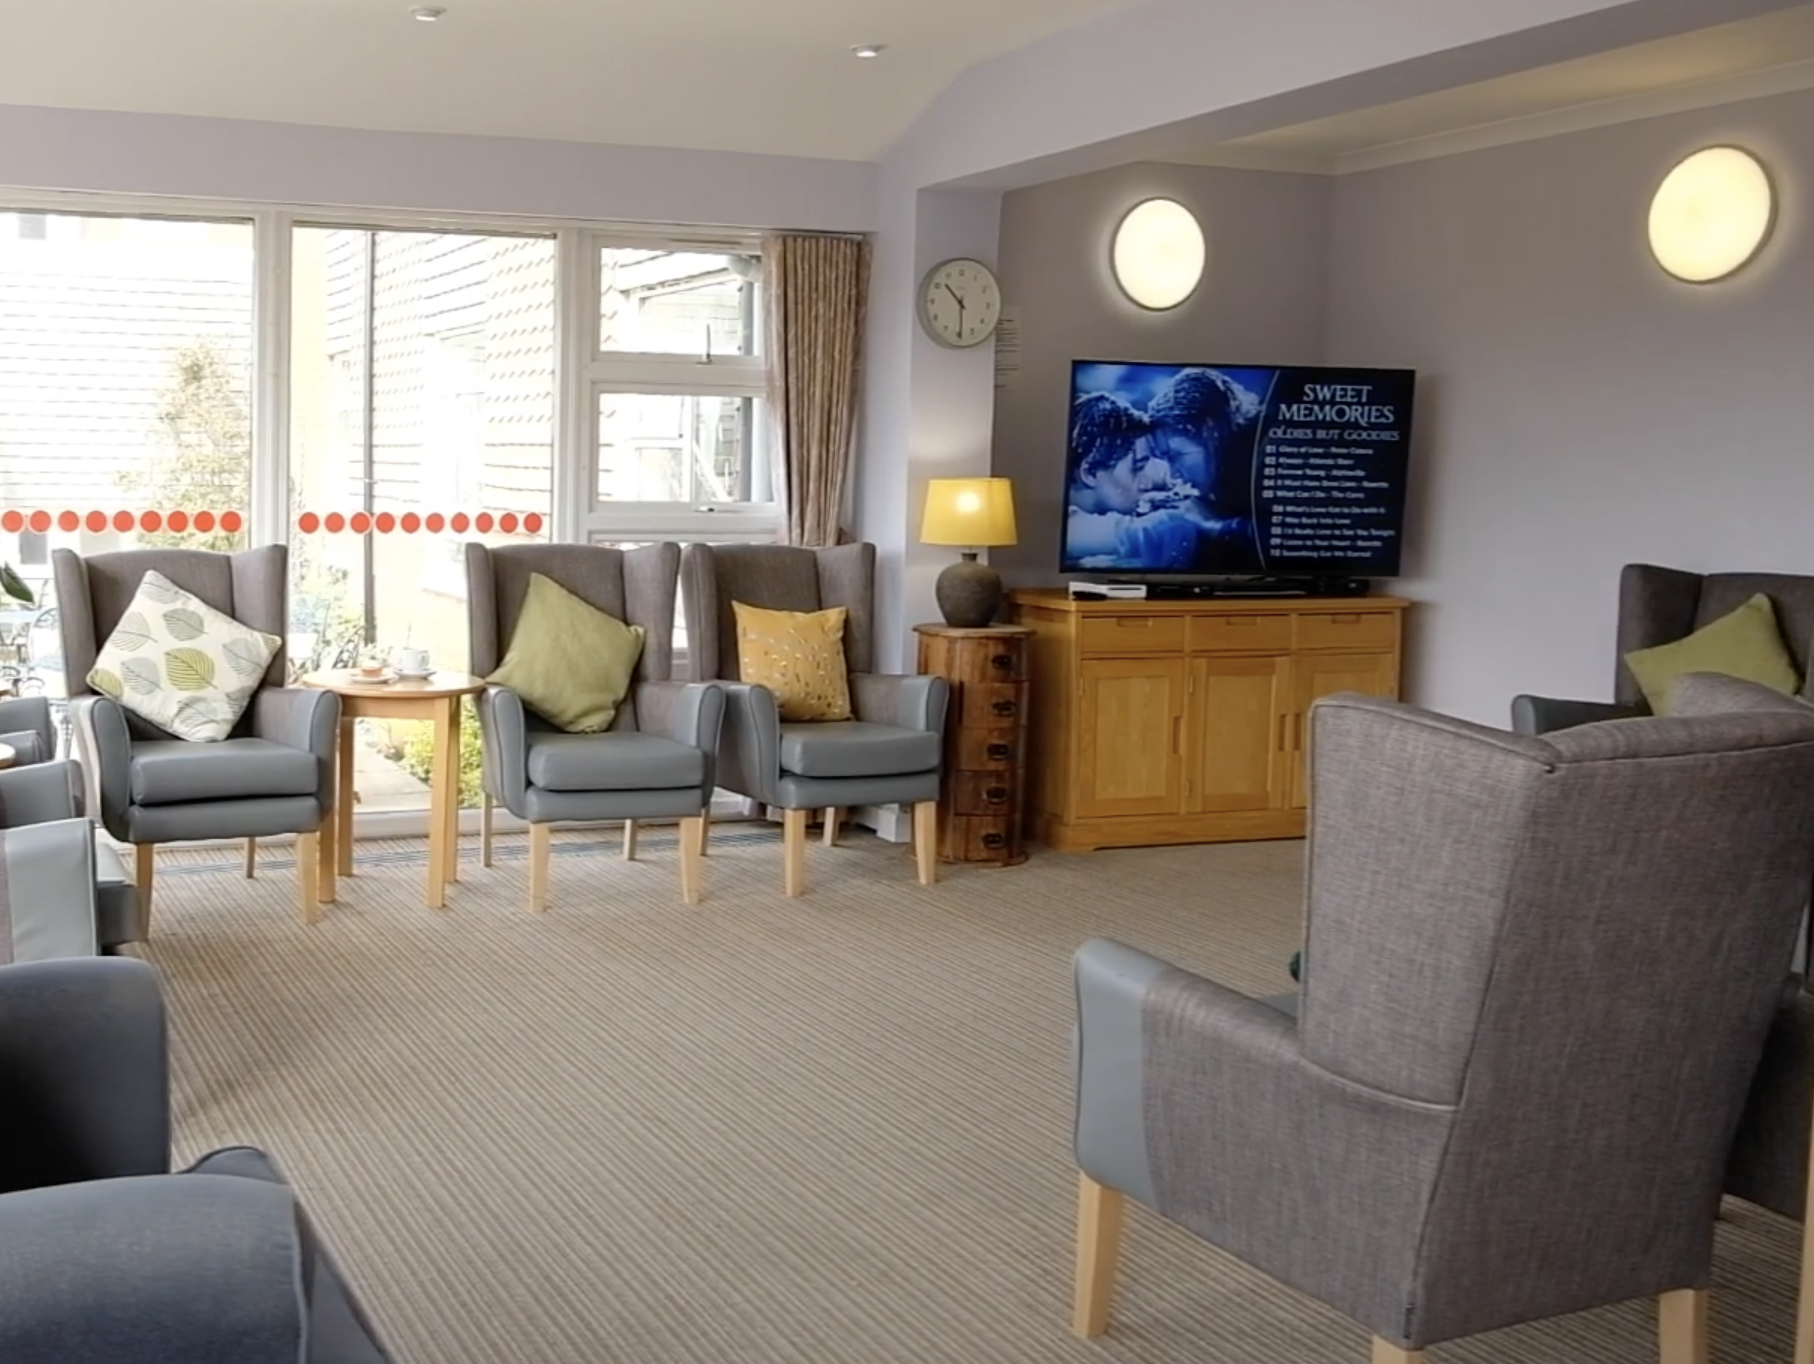 Sussex Housing and Care - Saxonwood care home 3